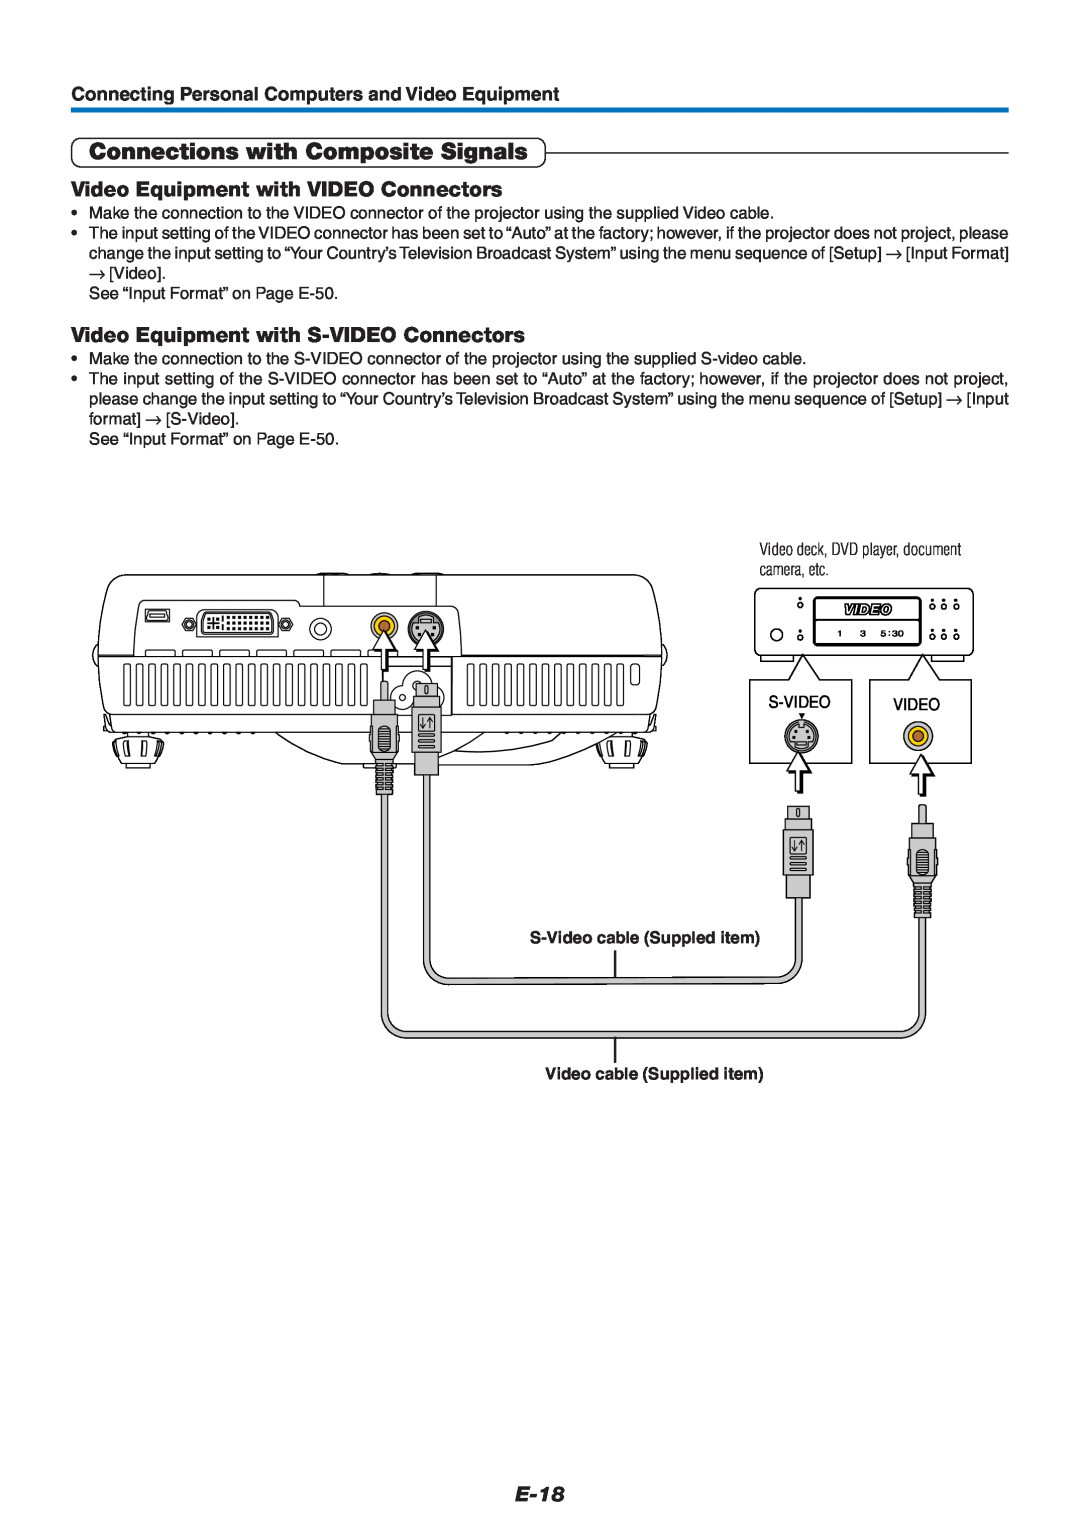 PLUS Vision U4-232 user manual Connections with Composite Signals, Video Equipment with VIDEO Connectors, E-18 